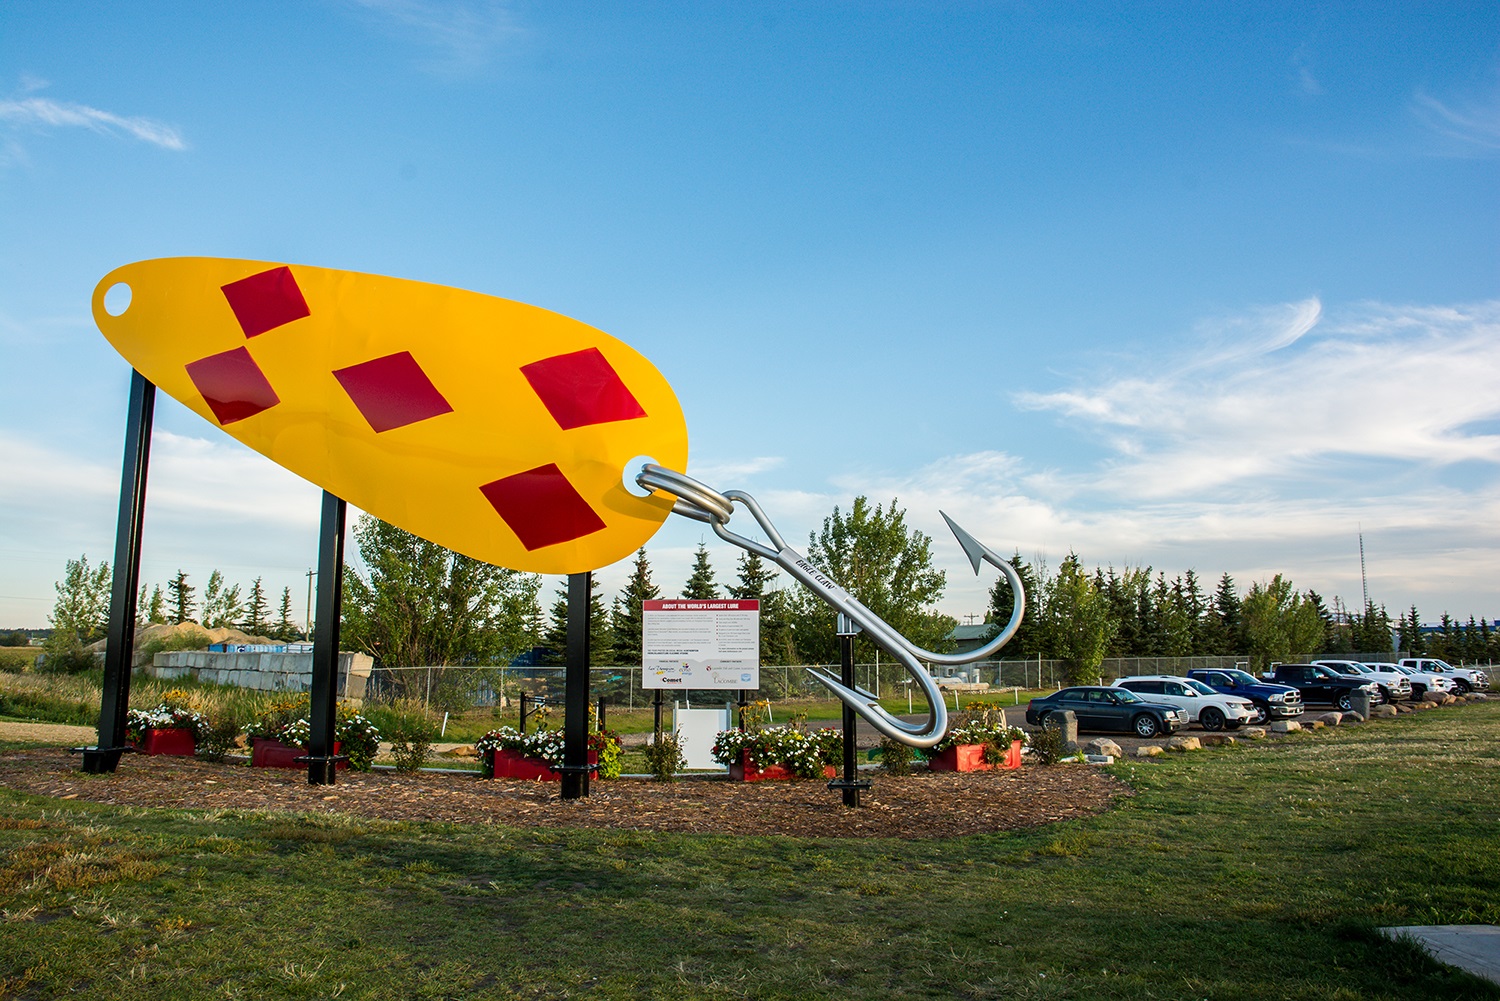 Lacombe's giant fishing lure is officially the world's largest